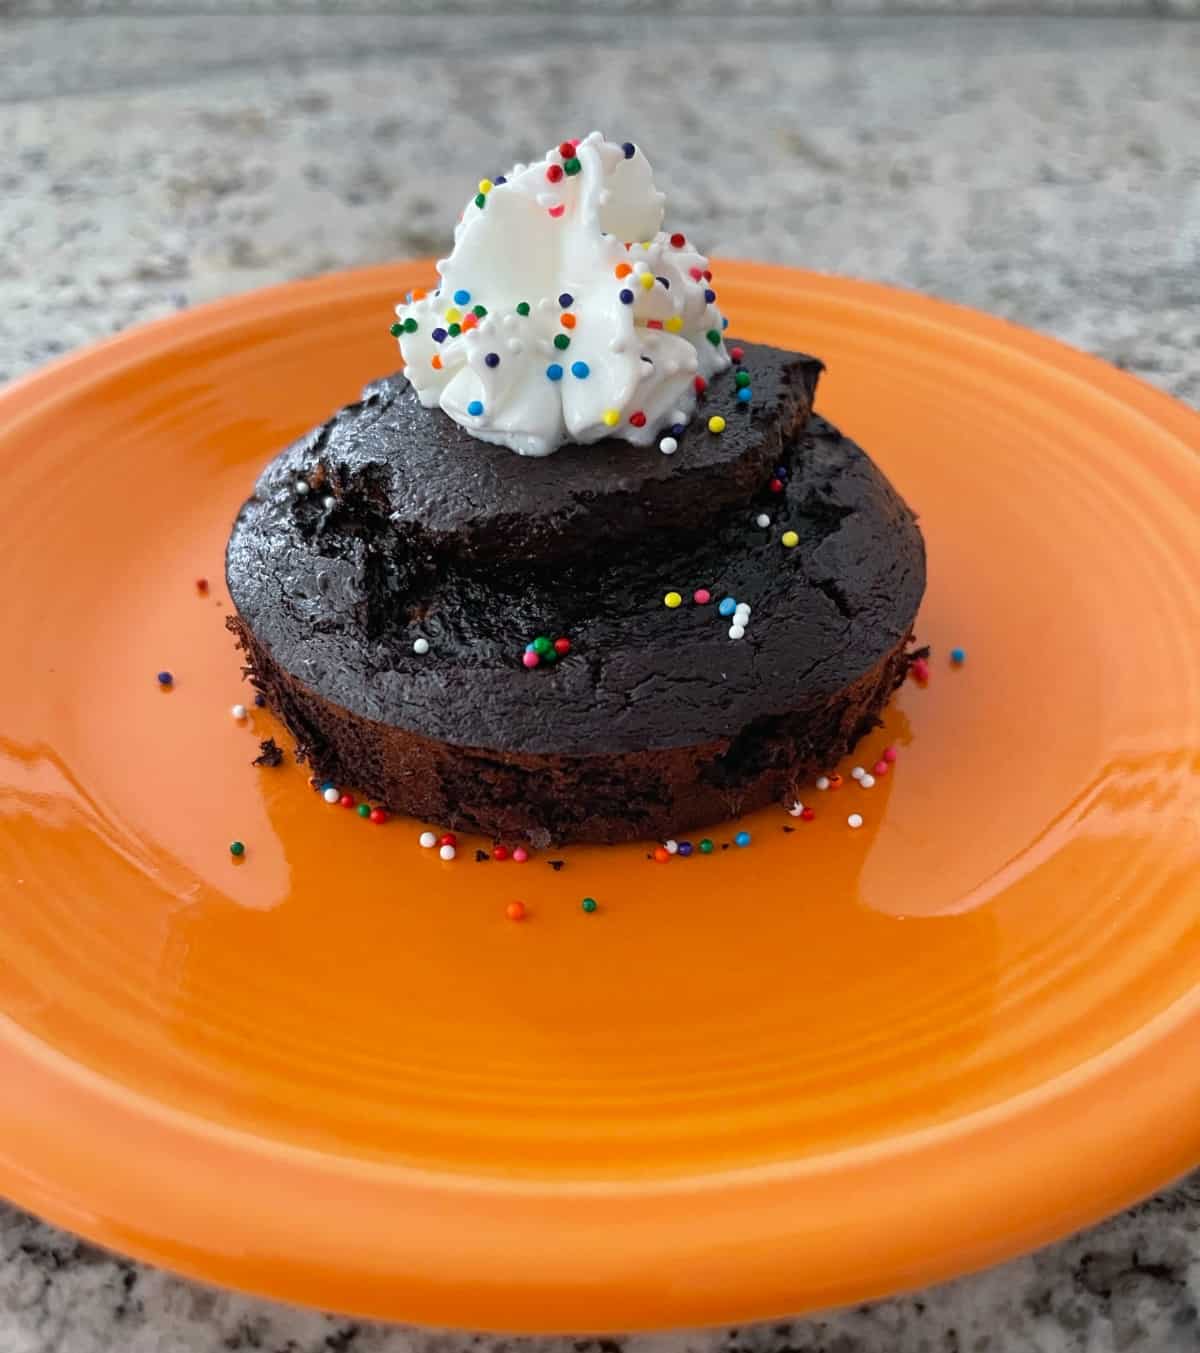 Flourless gluten-free chocolate mug cake decorated with lite whipped topping and rainbow sprinkles on small orange plate.